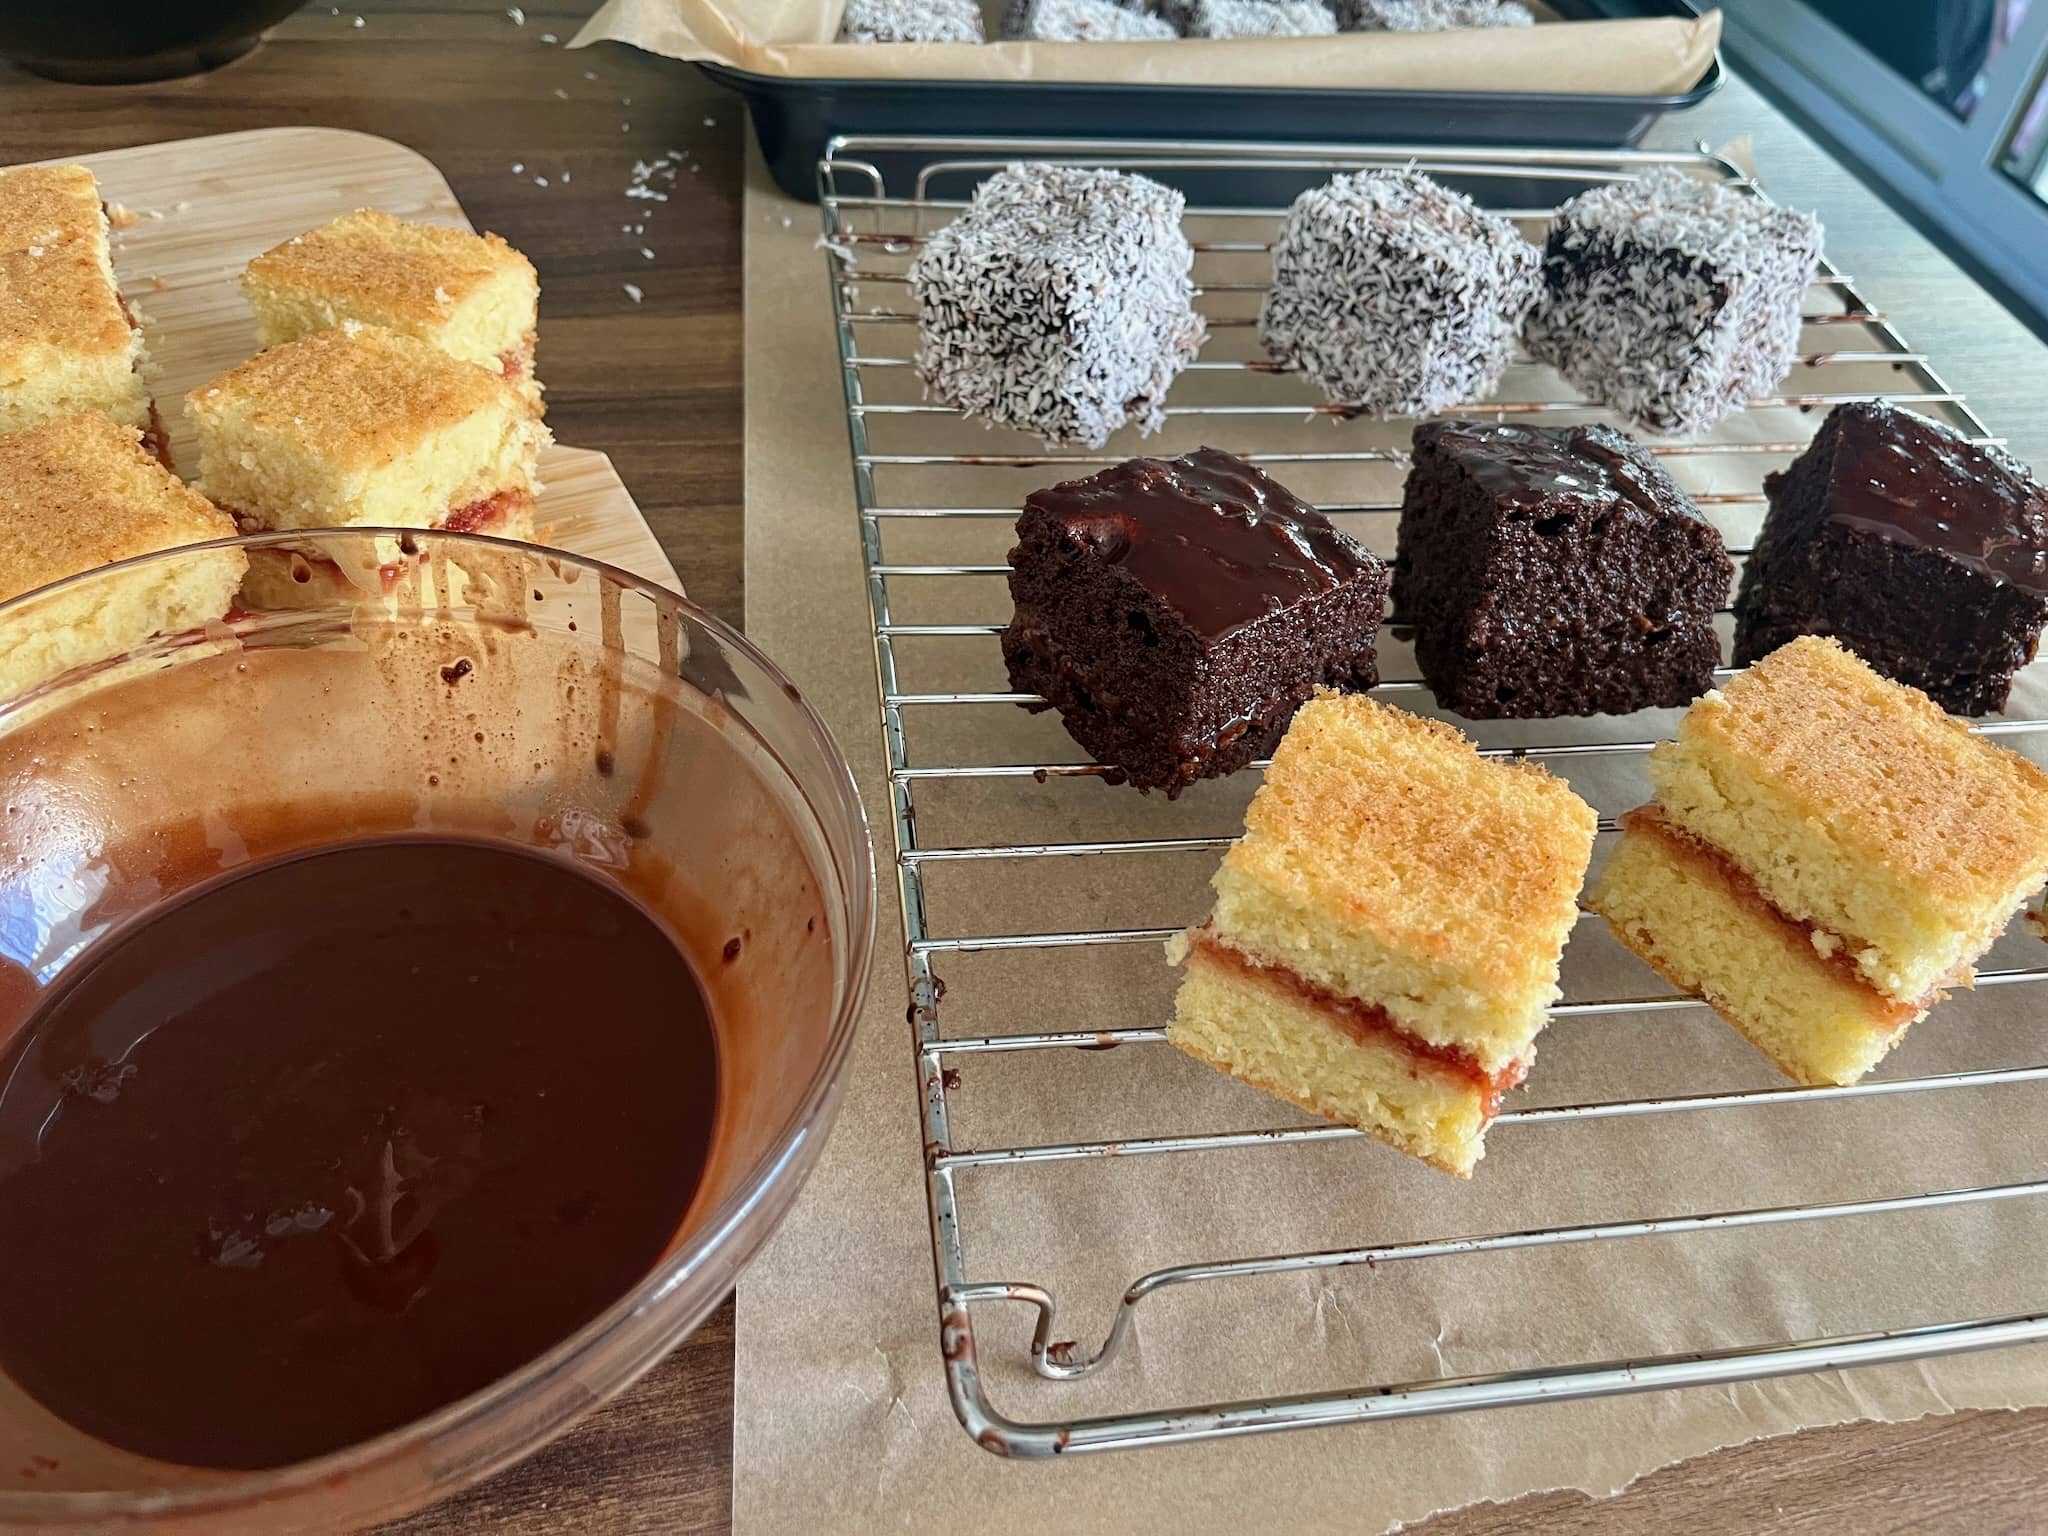 Plain sponge squares, squares coated in chocolate and suares coated in desiccated coconut on a tryl in process of making Lamingtons